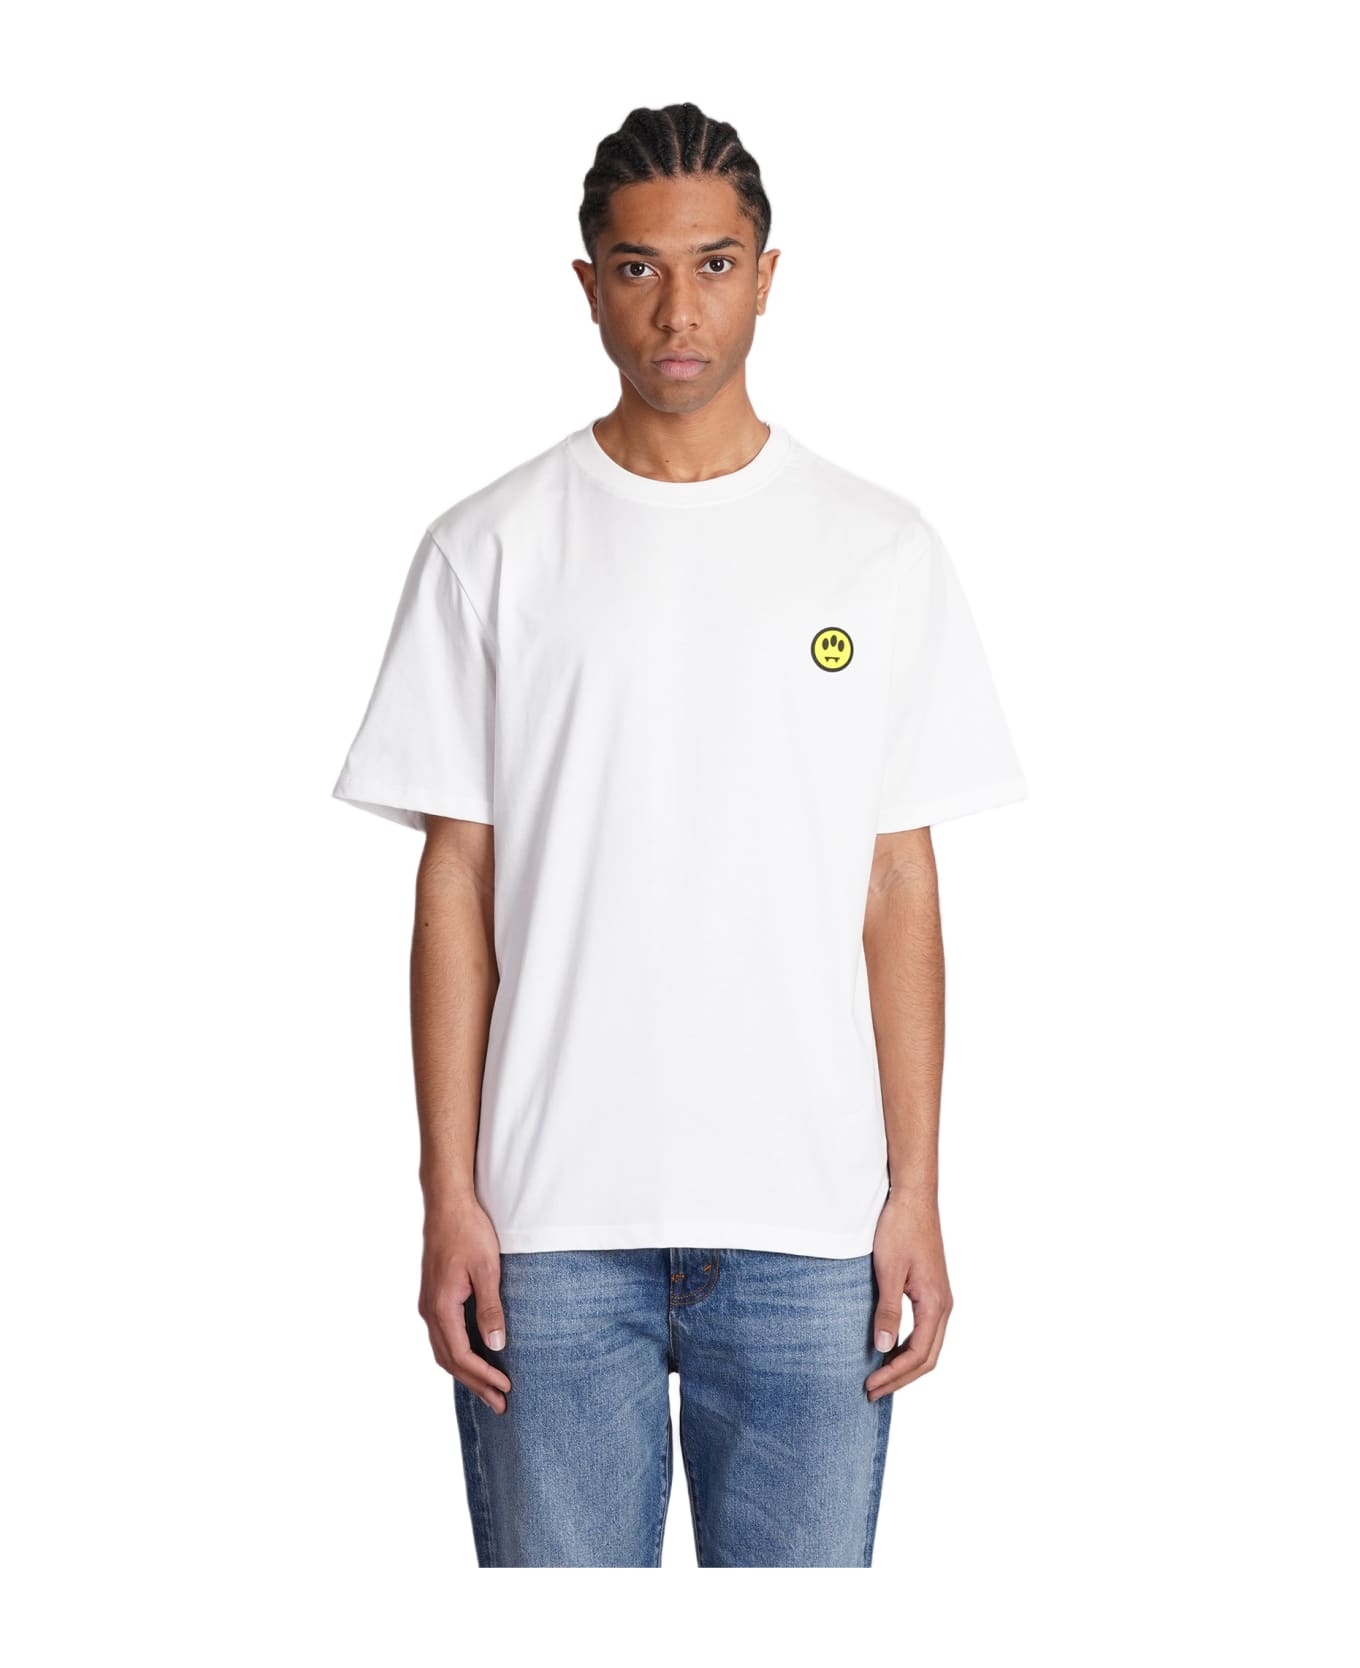 Barrow T-shirt In White Cotton - Off White シャツ